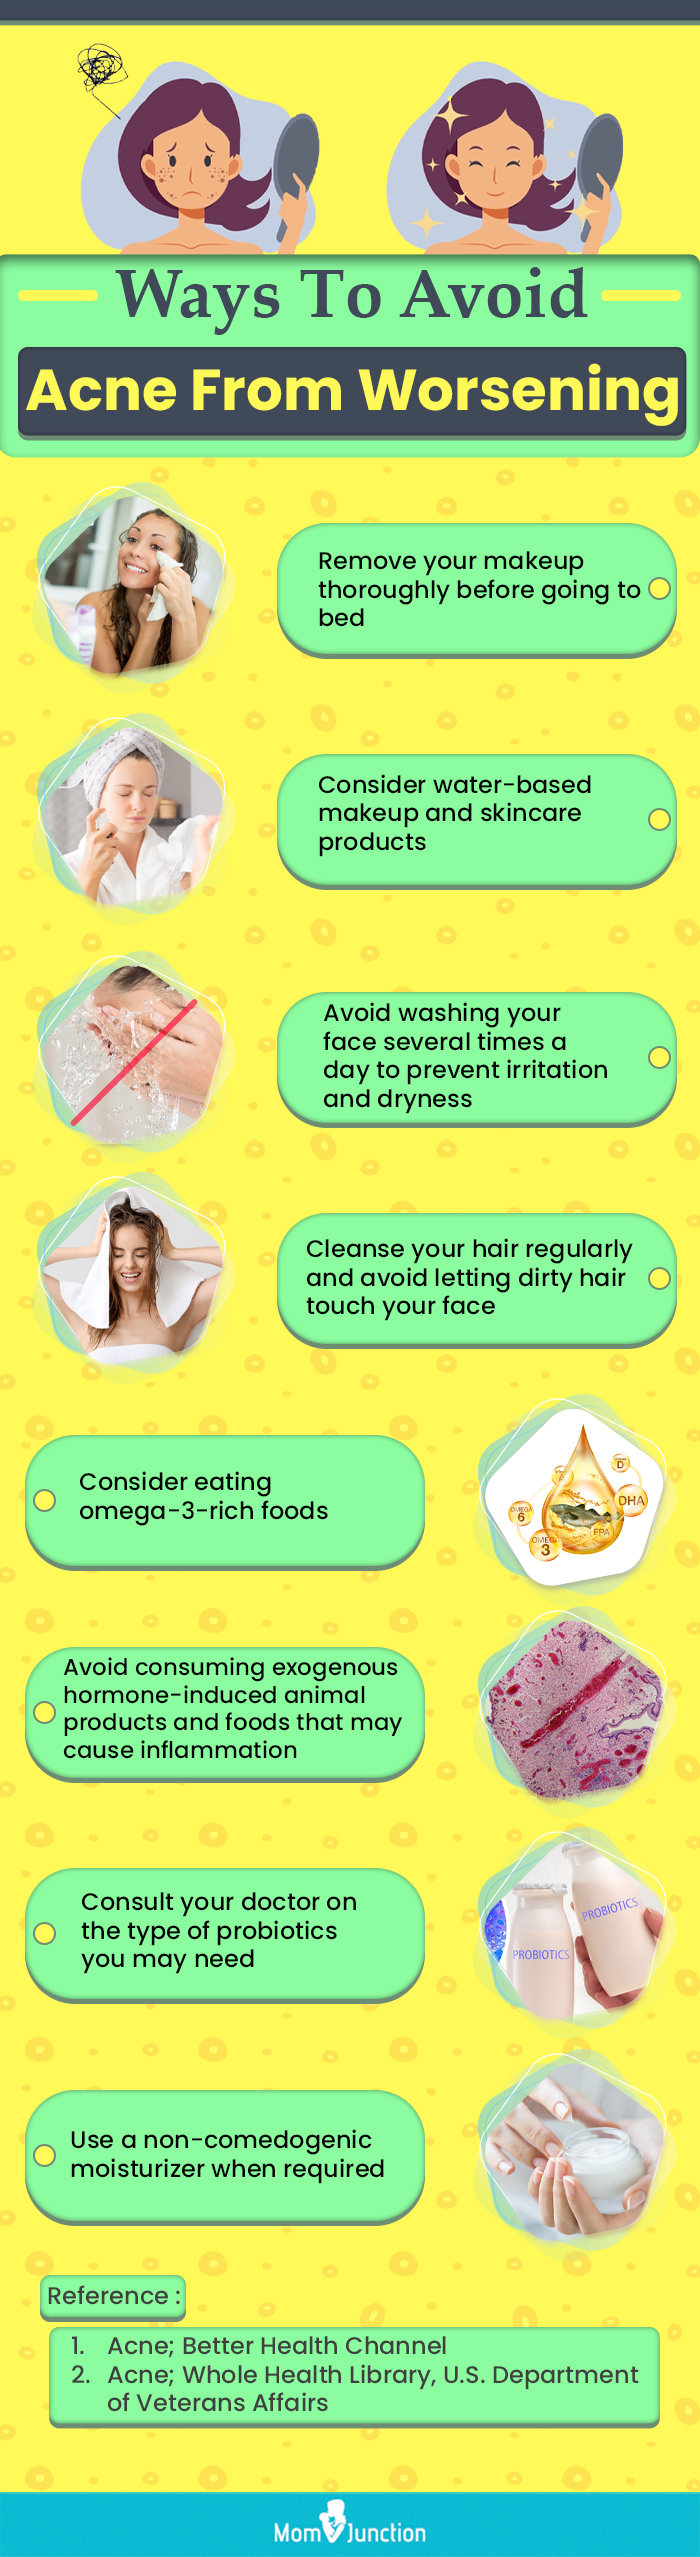 Ways To Avoid Acne From Worsening (infographic)